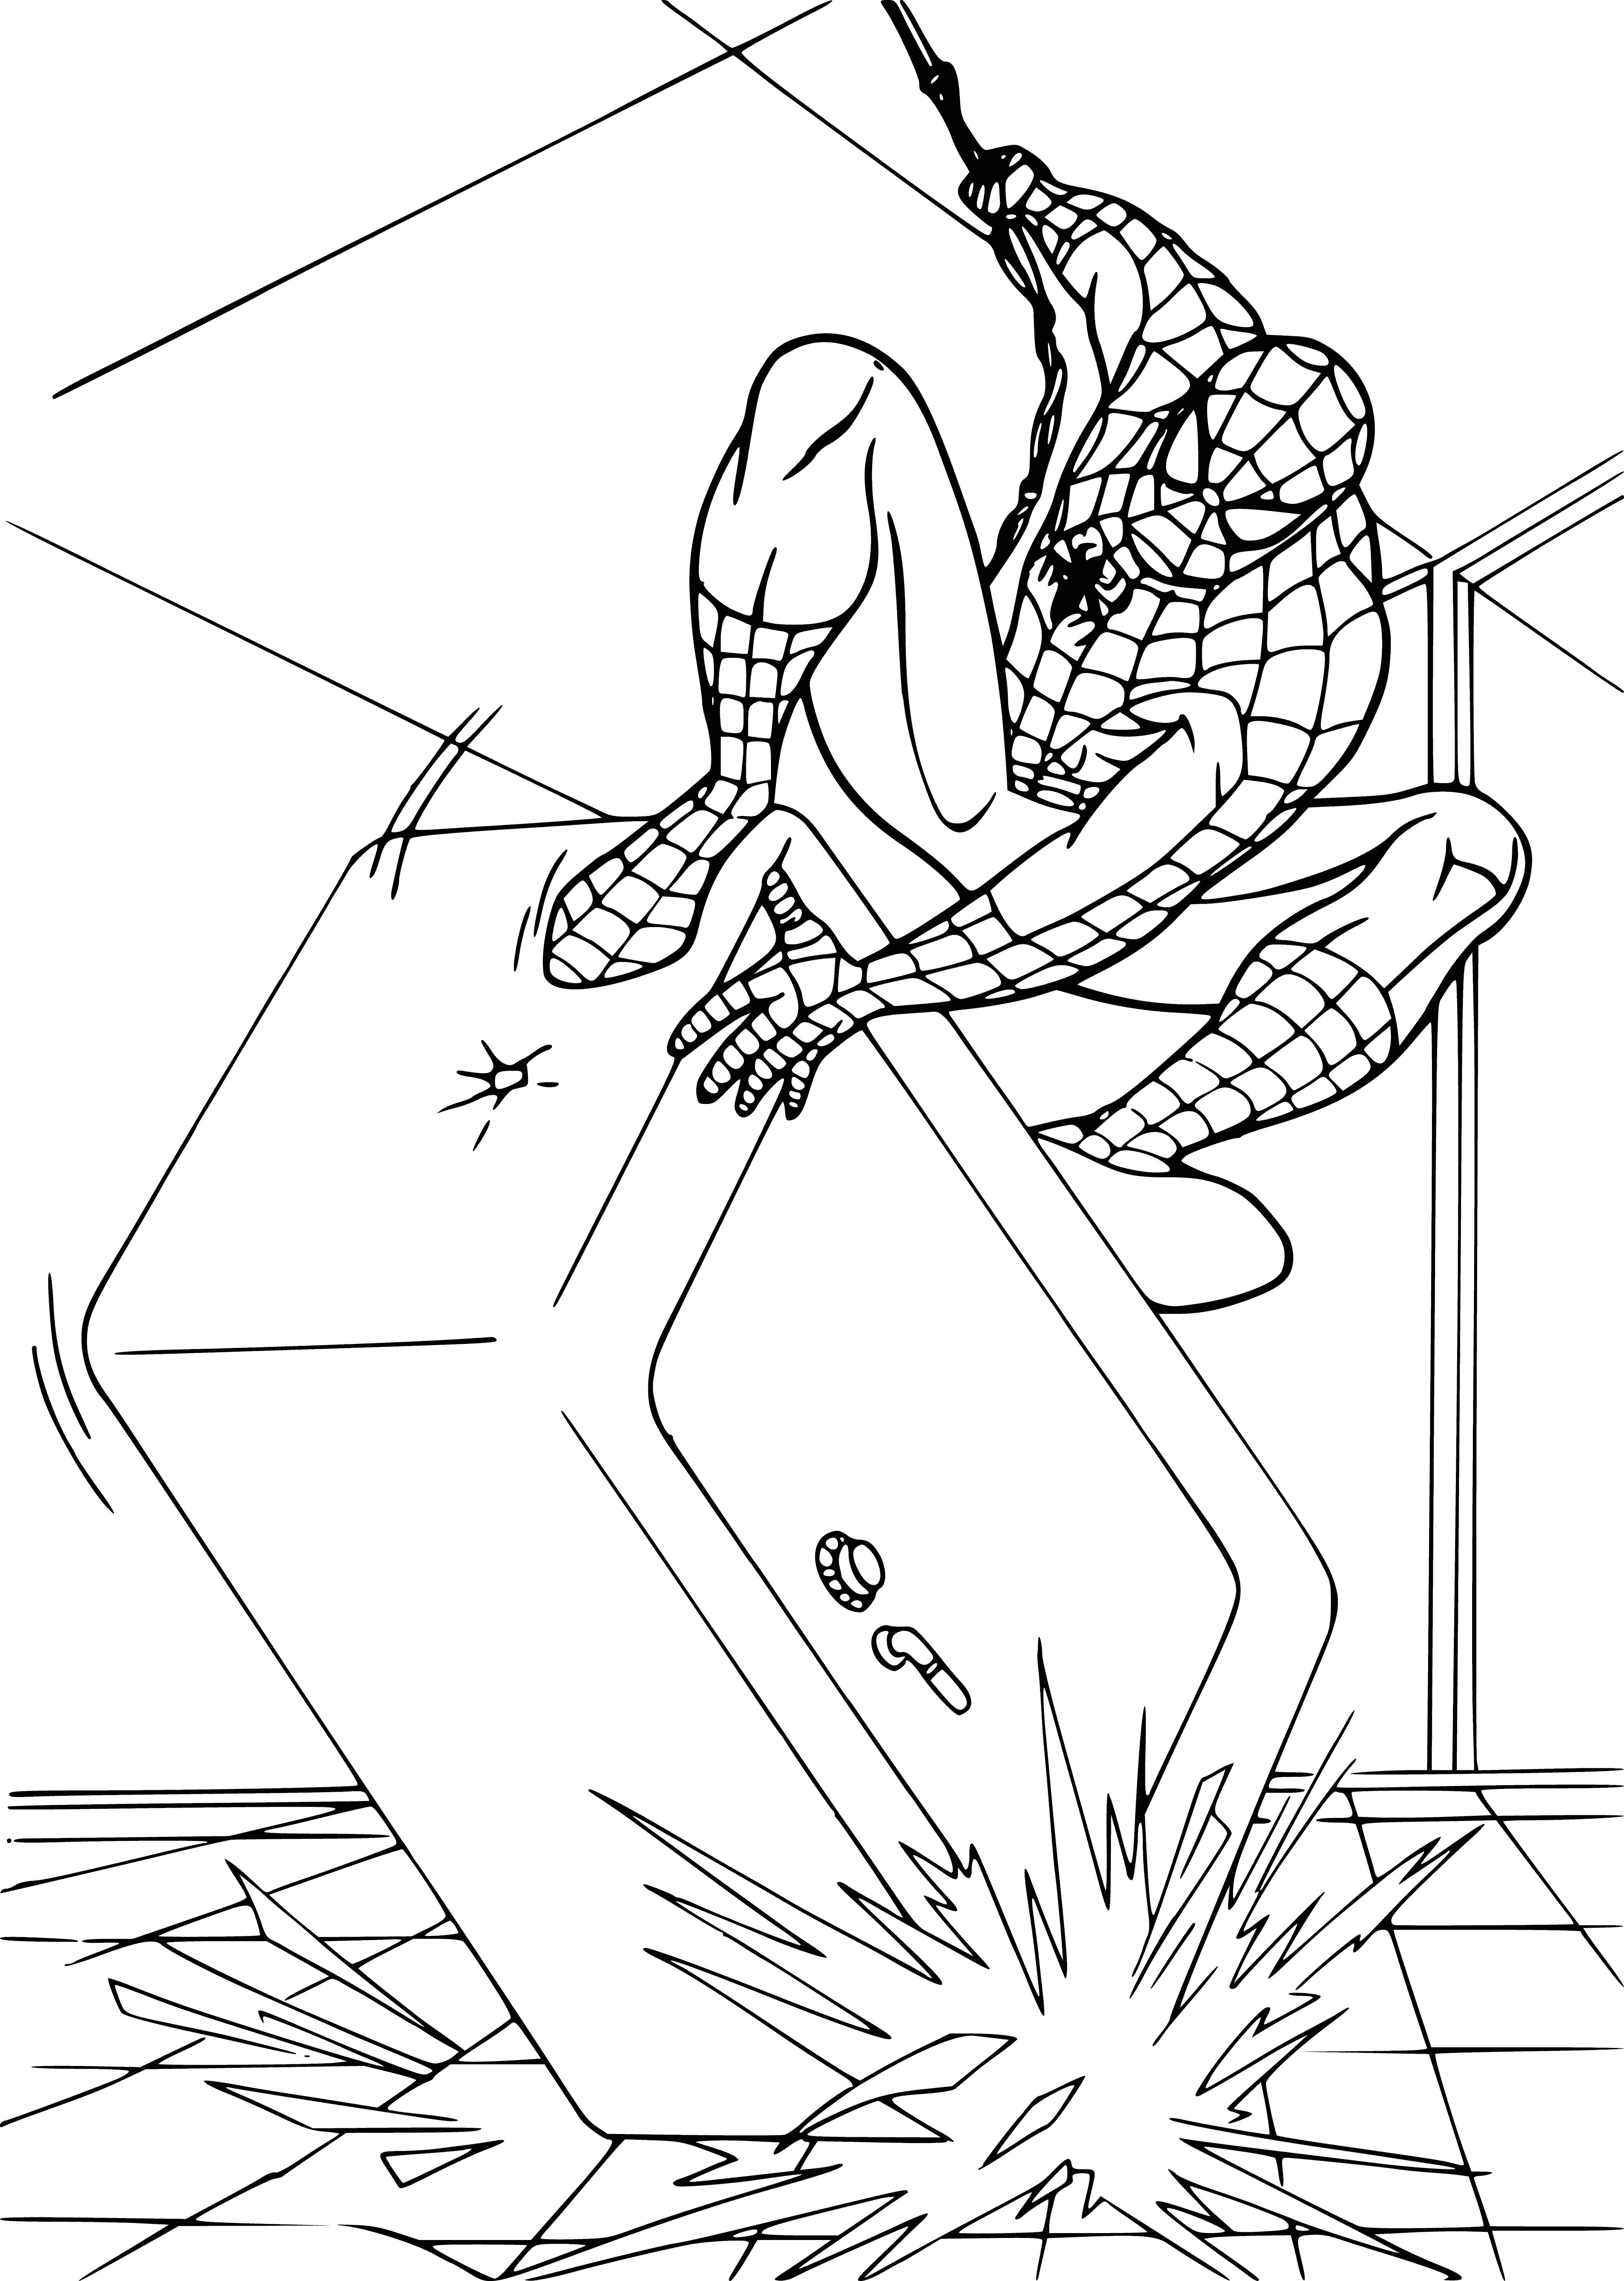 coloring page: SpiderMan hangs from building, red-blue costume w/ black spider, hidden face behind mask. #Superhero